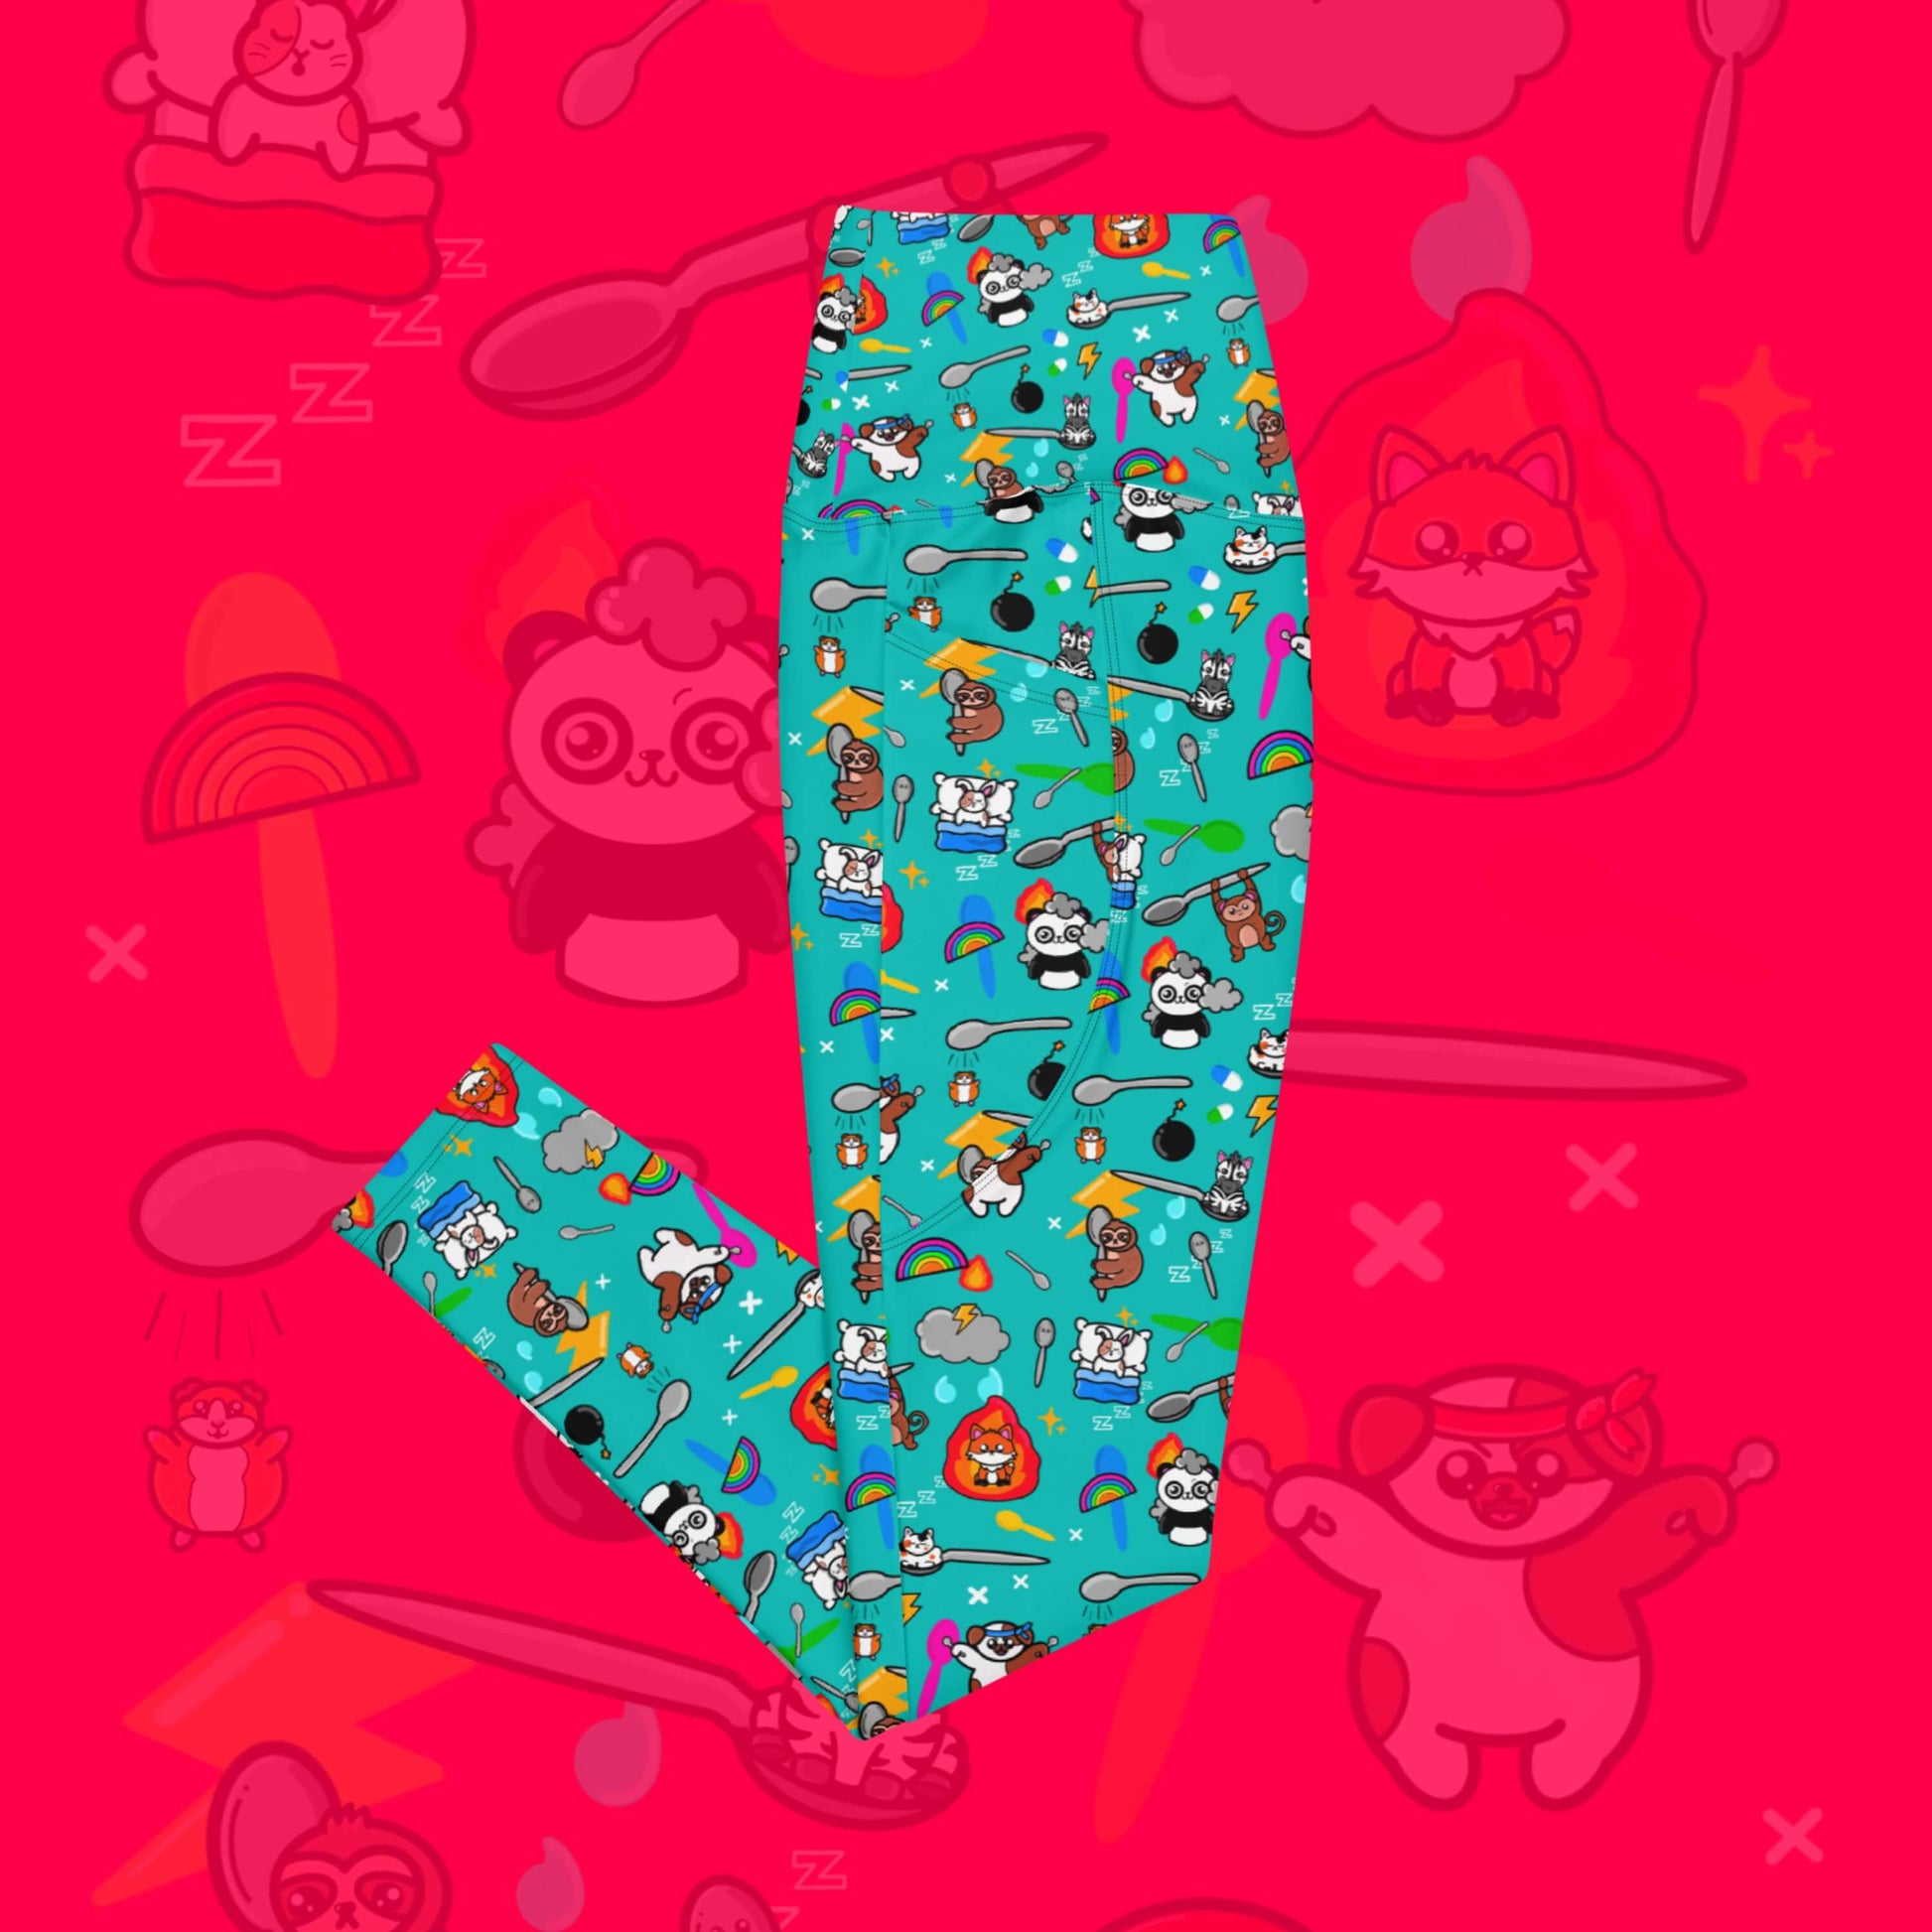 The Spoonie Leggings with Pockets on a red background with a faded version of the print in the background. The blue leggings feature various invisible illness themed animals, rainbows, spoons, sparkles, flames, pills and lightning bolts. Raising awareness for hidden disabilities.